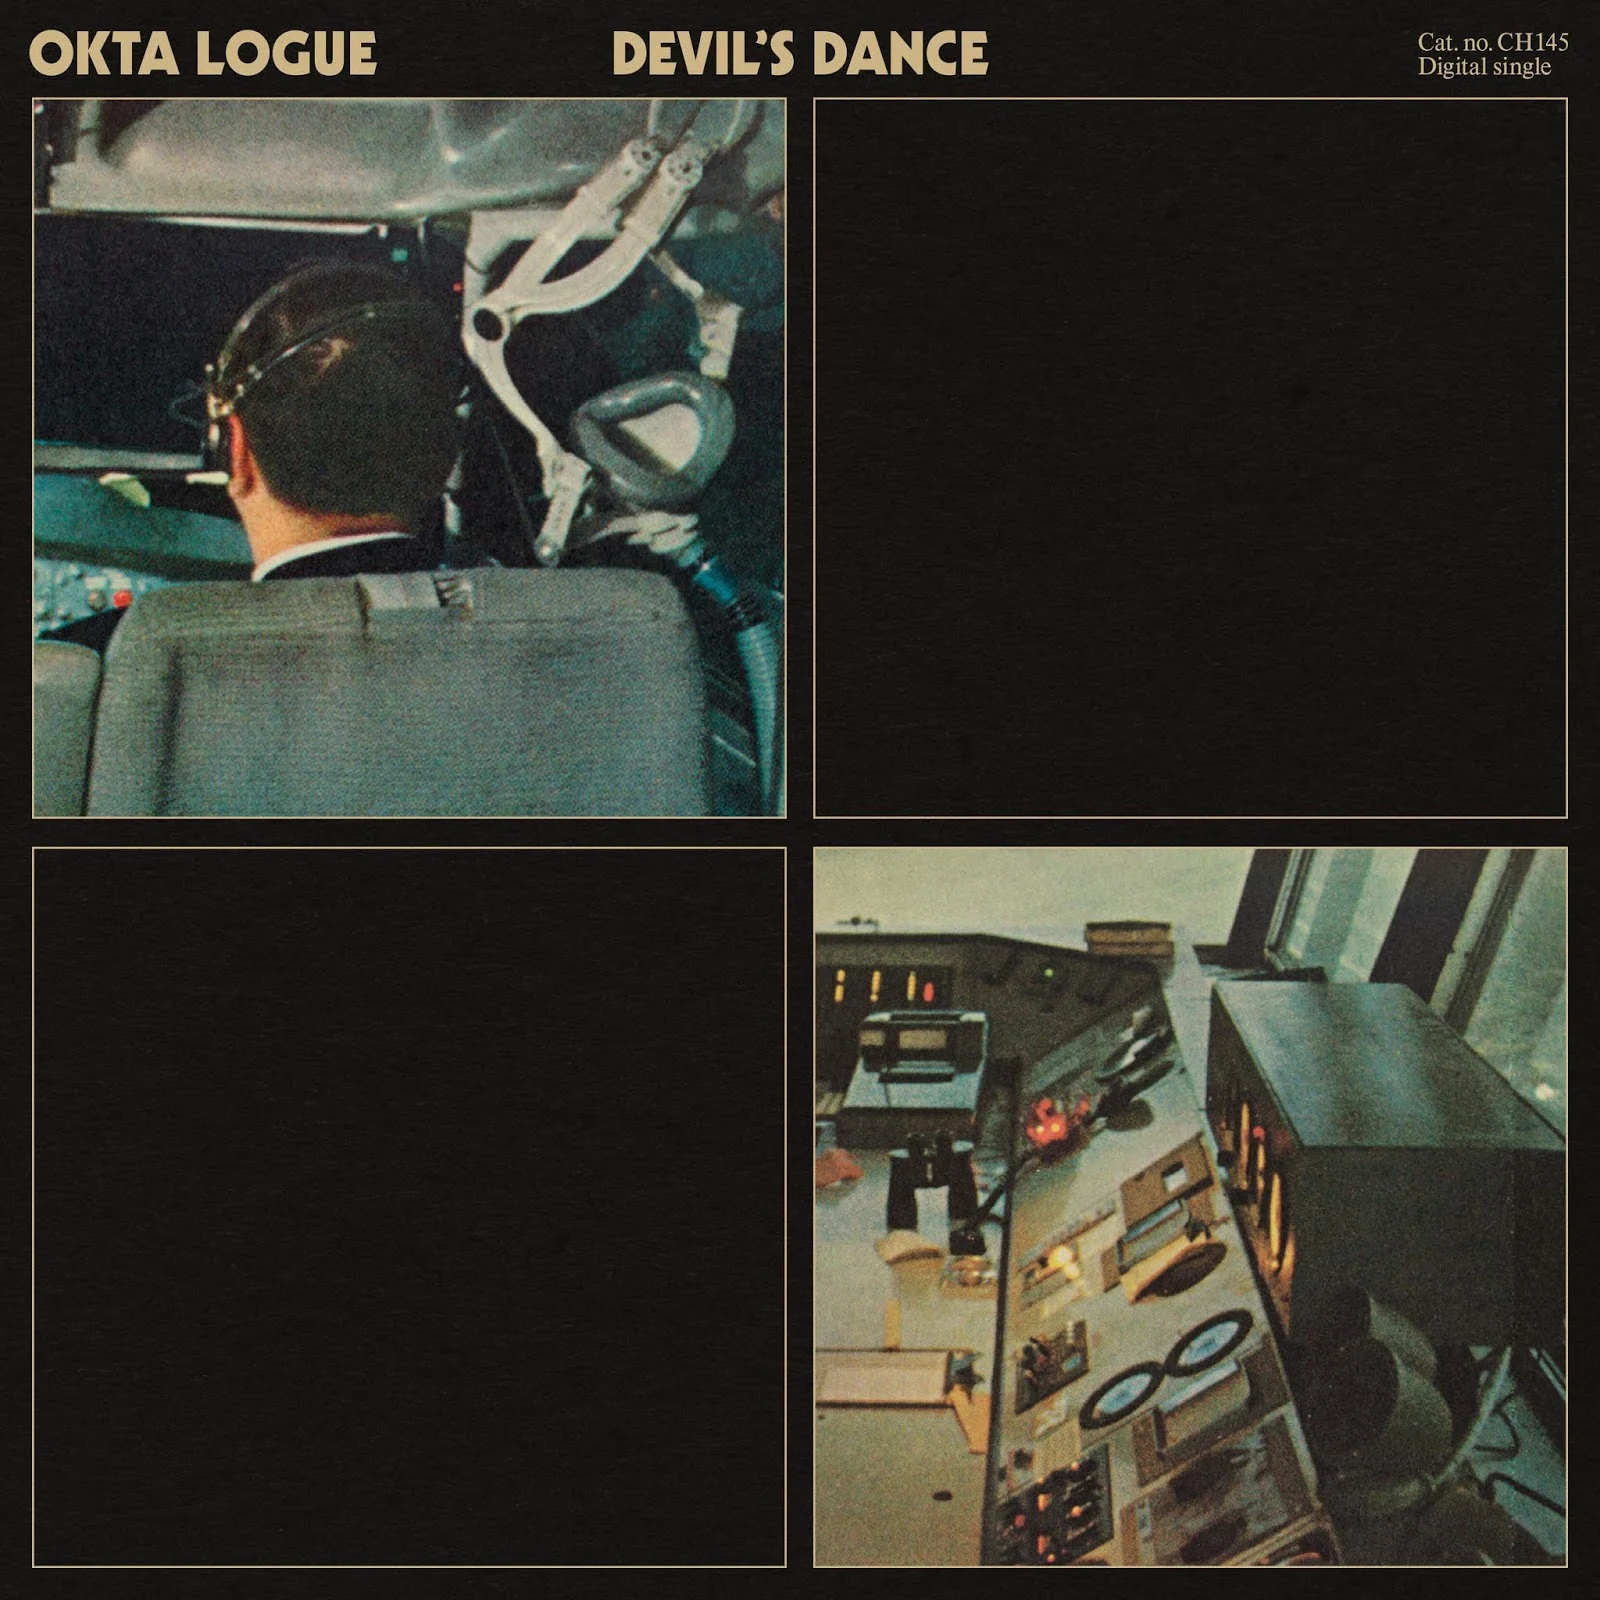 OKTA LOGUE - DEVIL'S DANCE | SONG OF THE DAY 